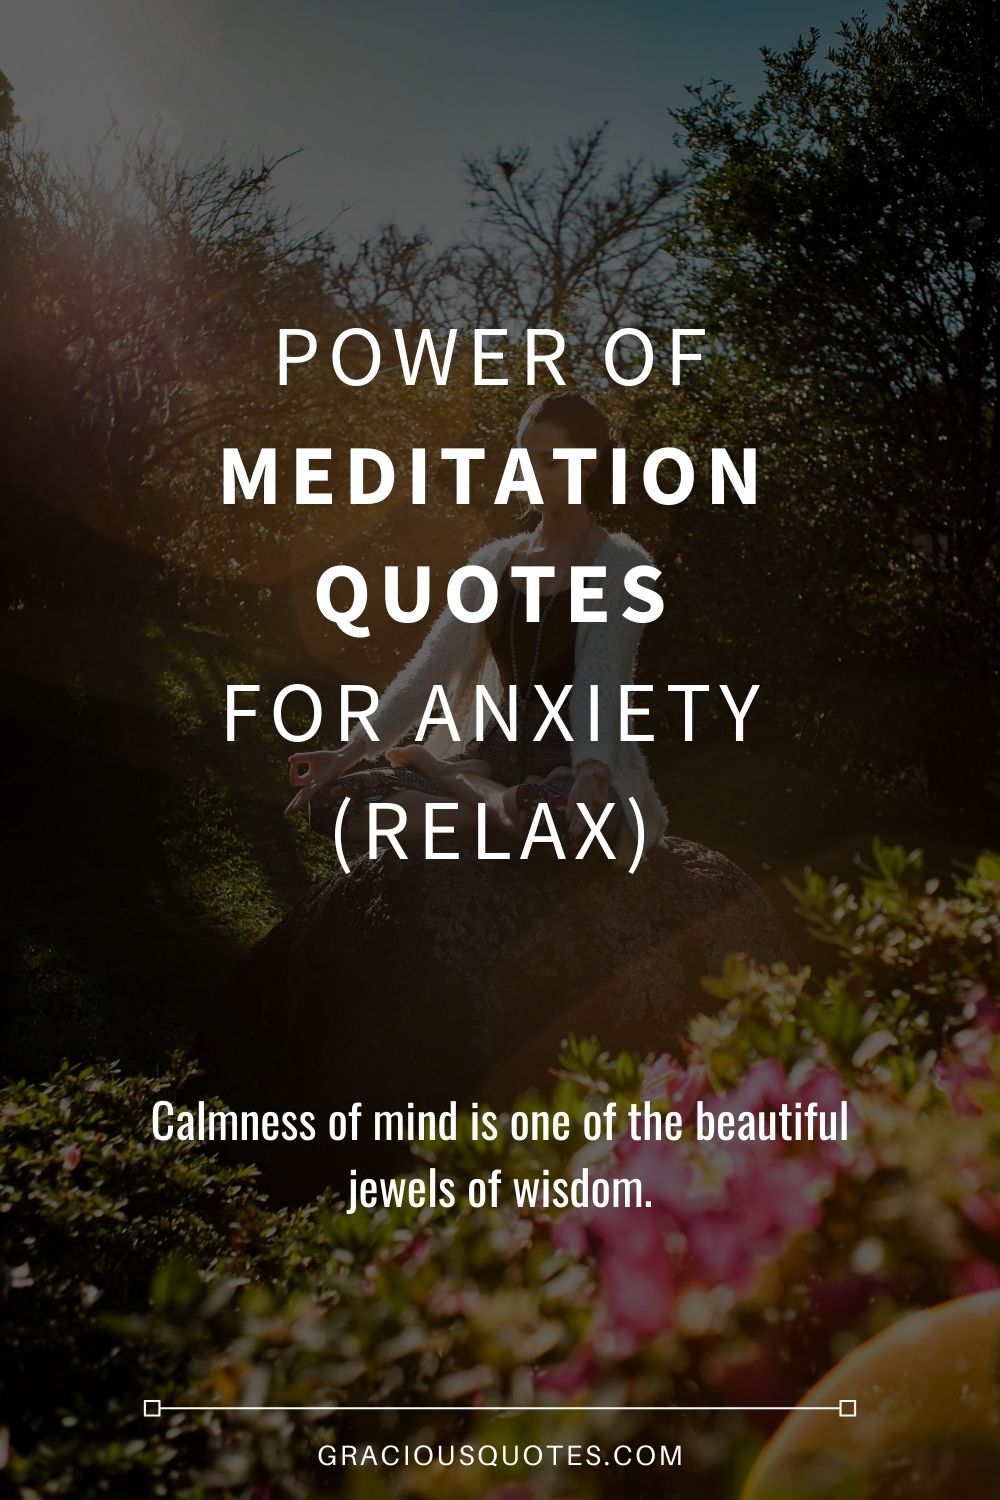 55 Power of Meditation Quotes for Anxiety (RELAX)